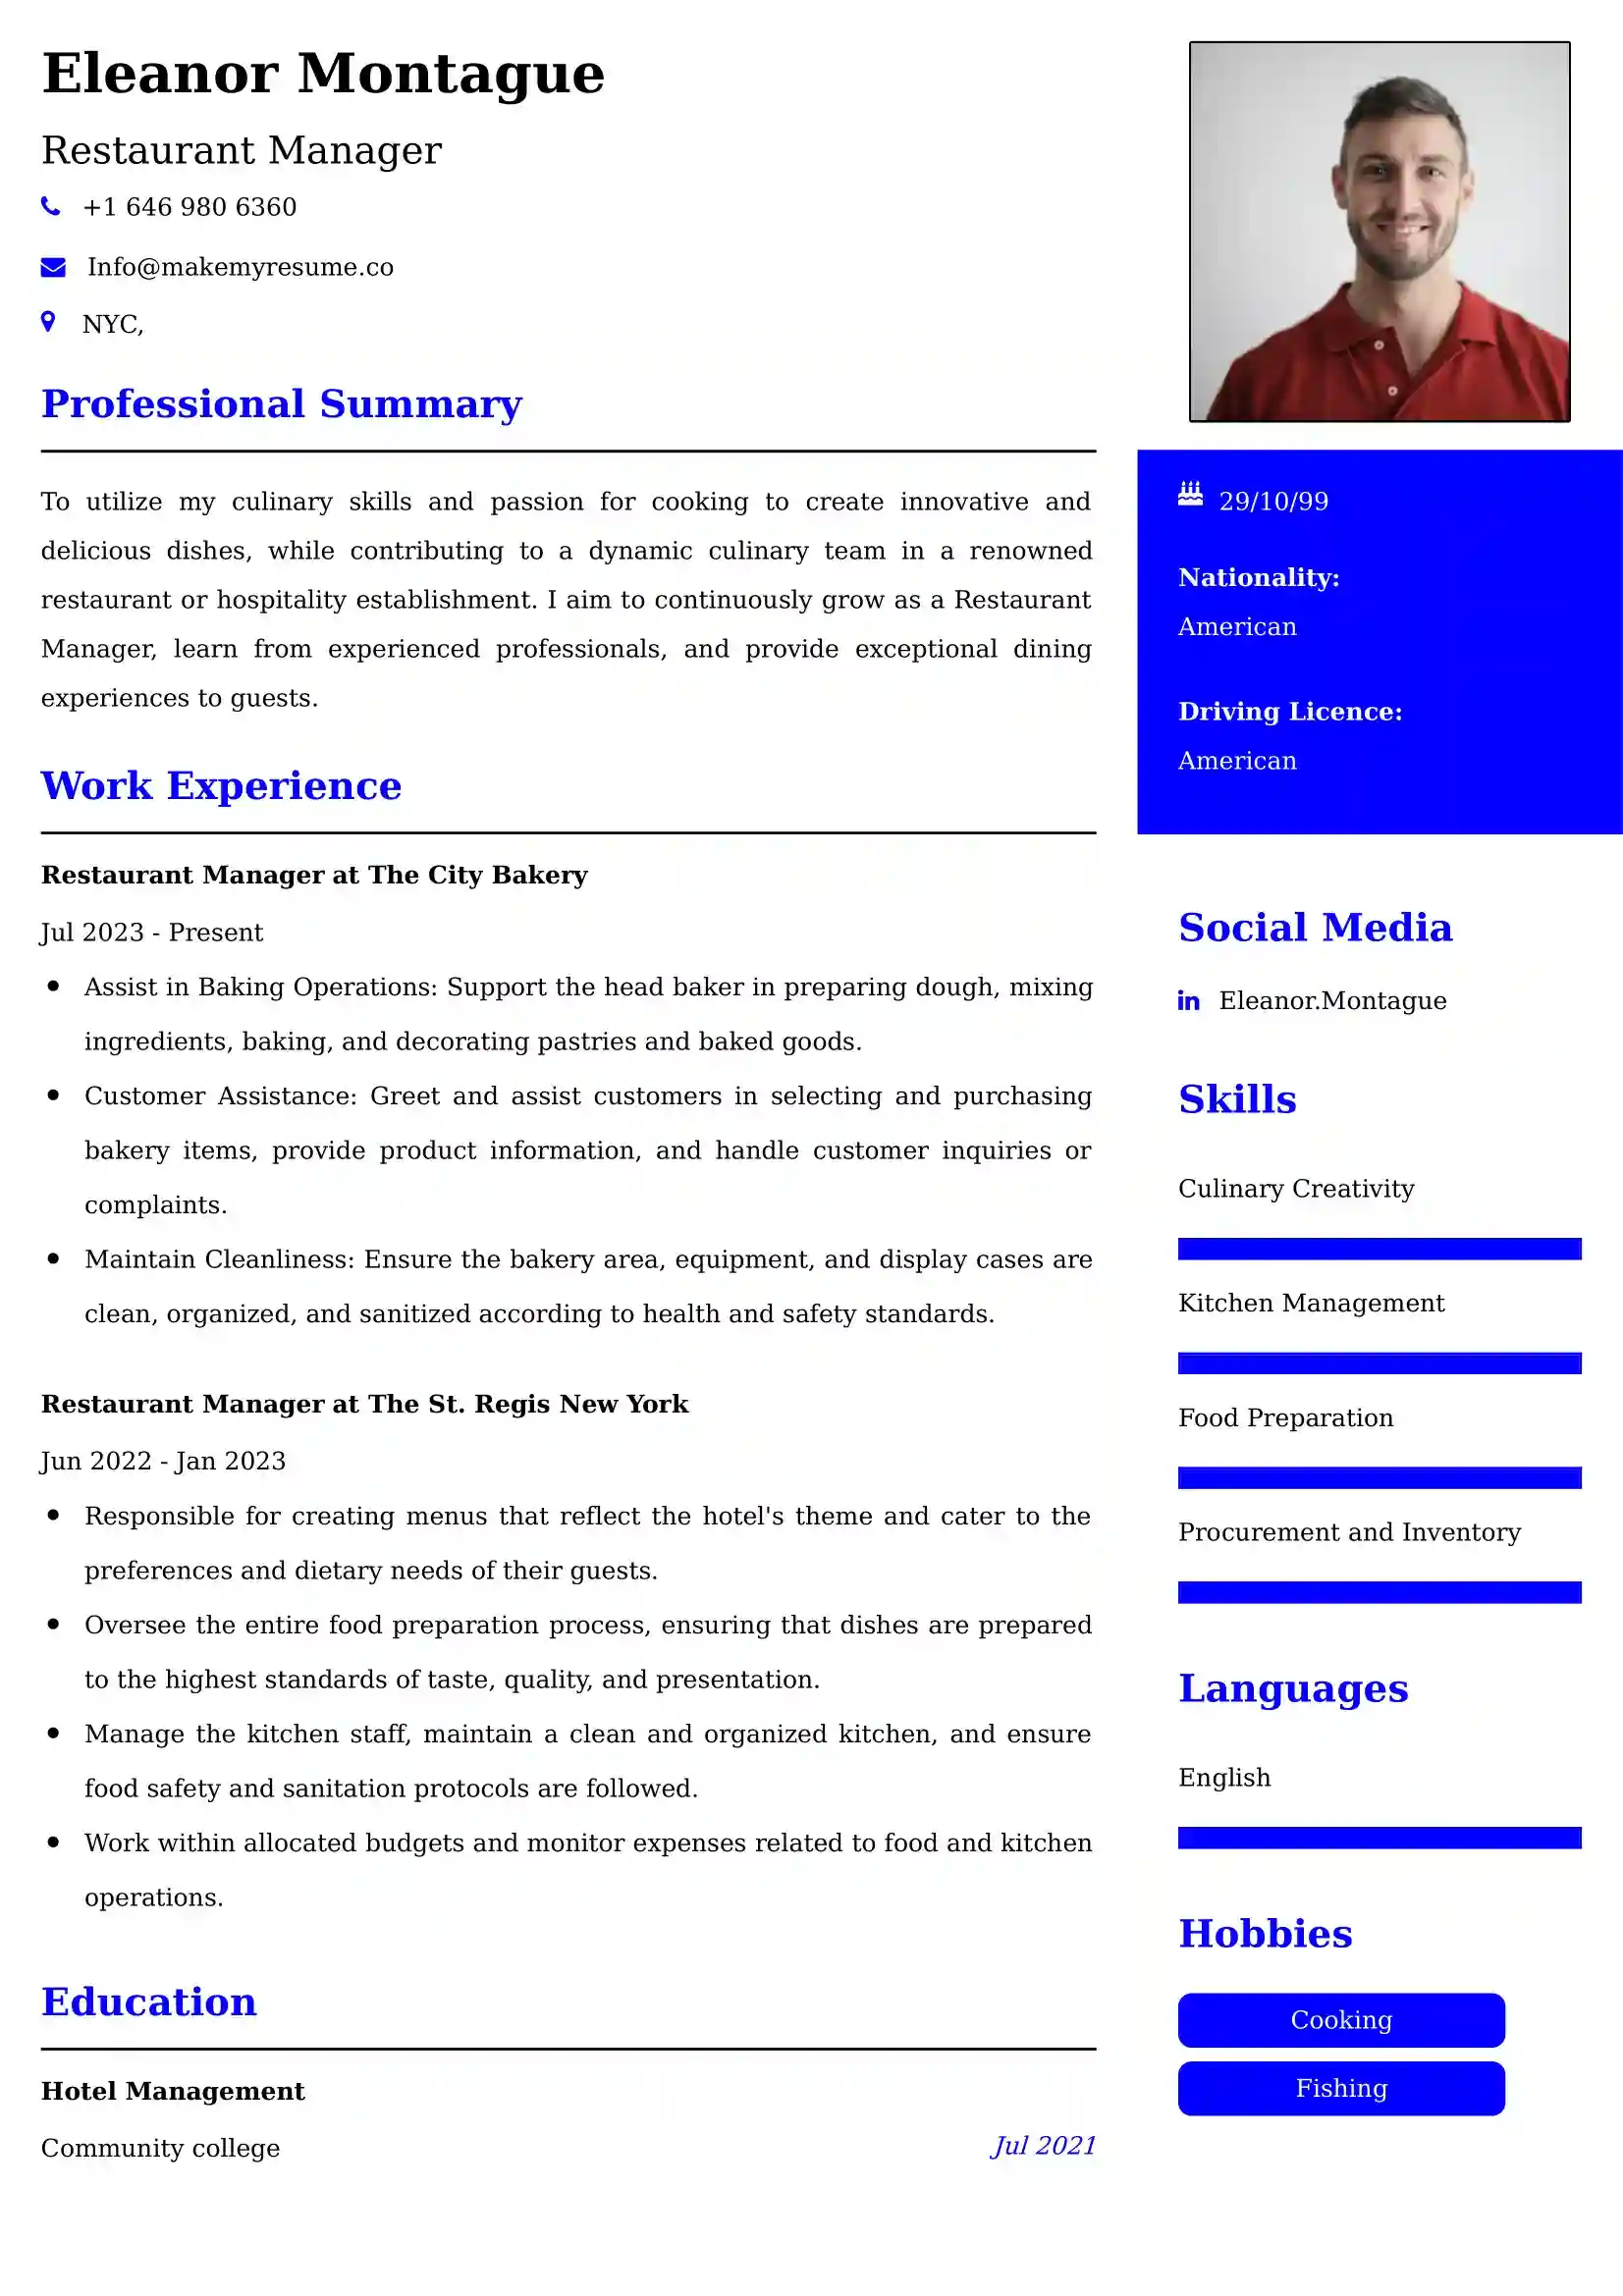 Restaurant Manager Resume Examples for UAE